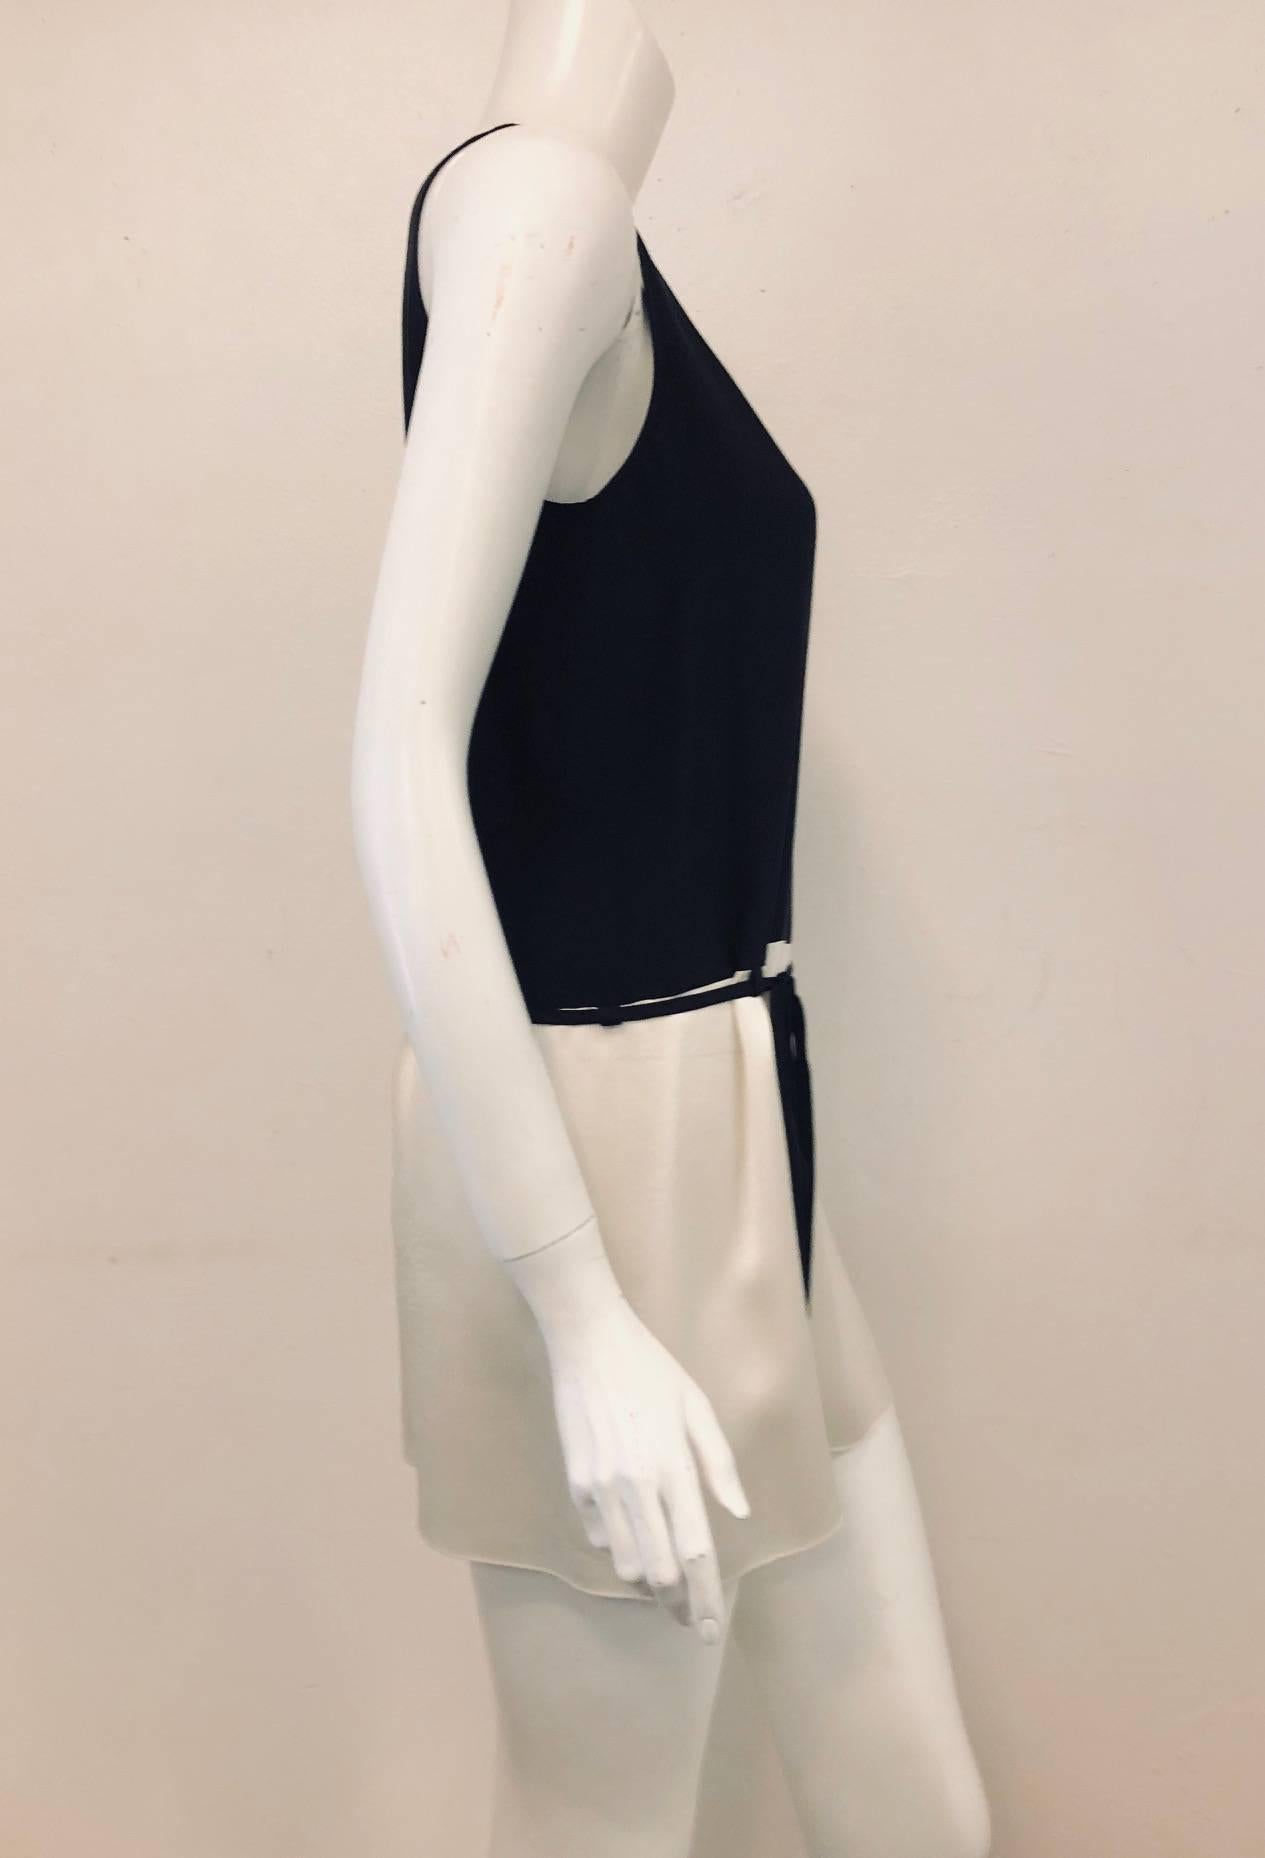 Chanel black and ivory tunic dress with string belt.  This silk scoop neck, sleeveless dress black top and ivory skirt is soft and sexy to be worn on a warm day or hot night!   With drop waist to the hip bone and a thin silk cord to be tied as a